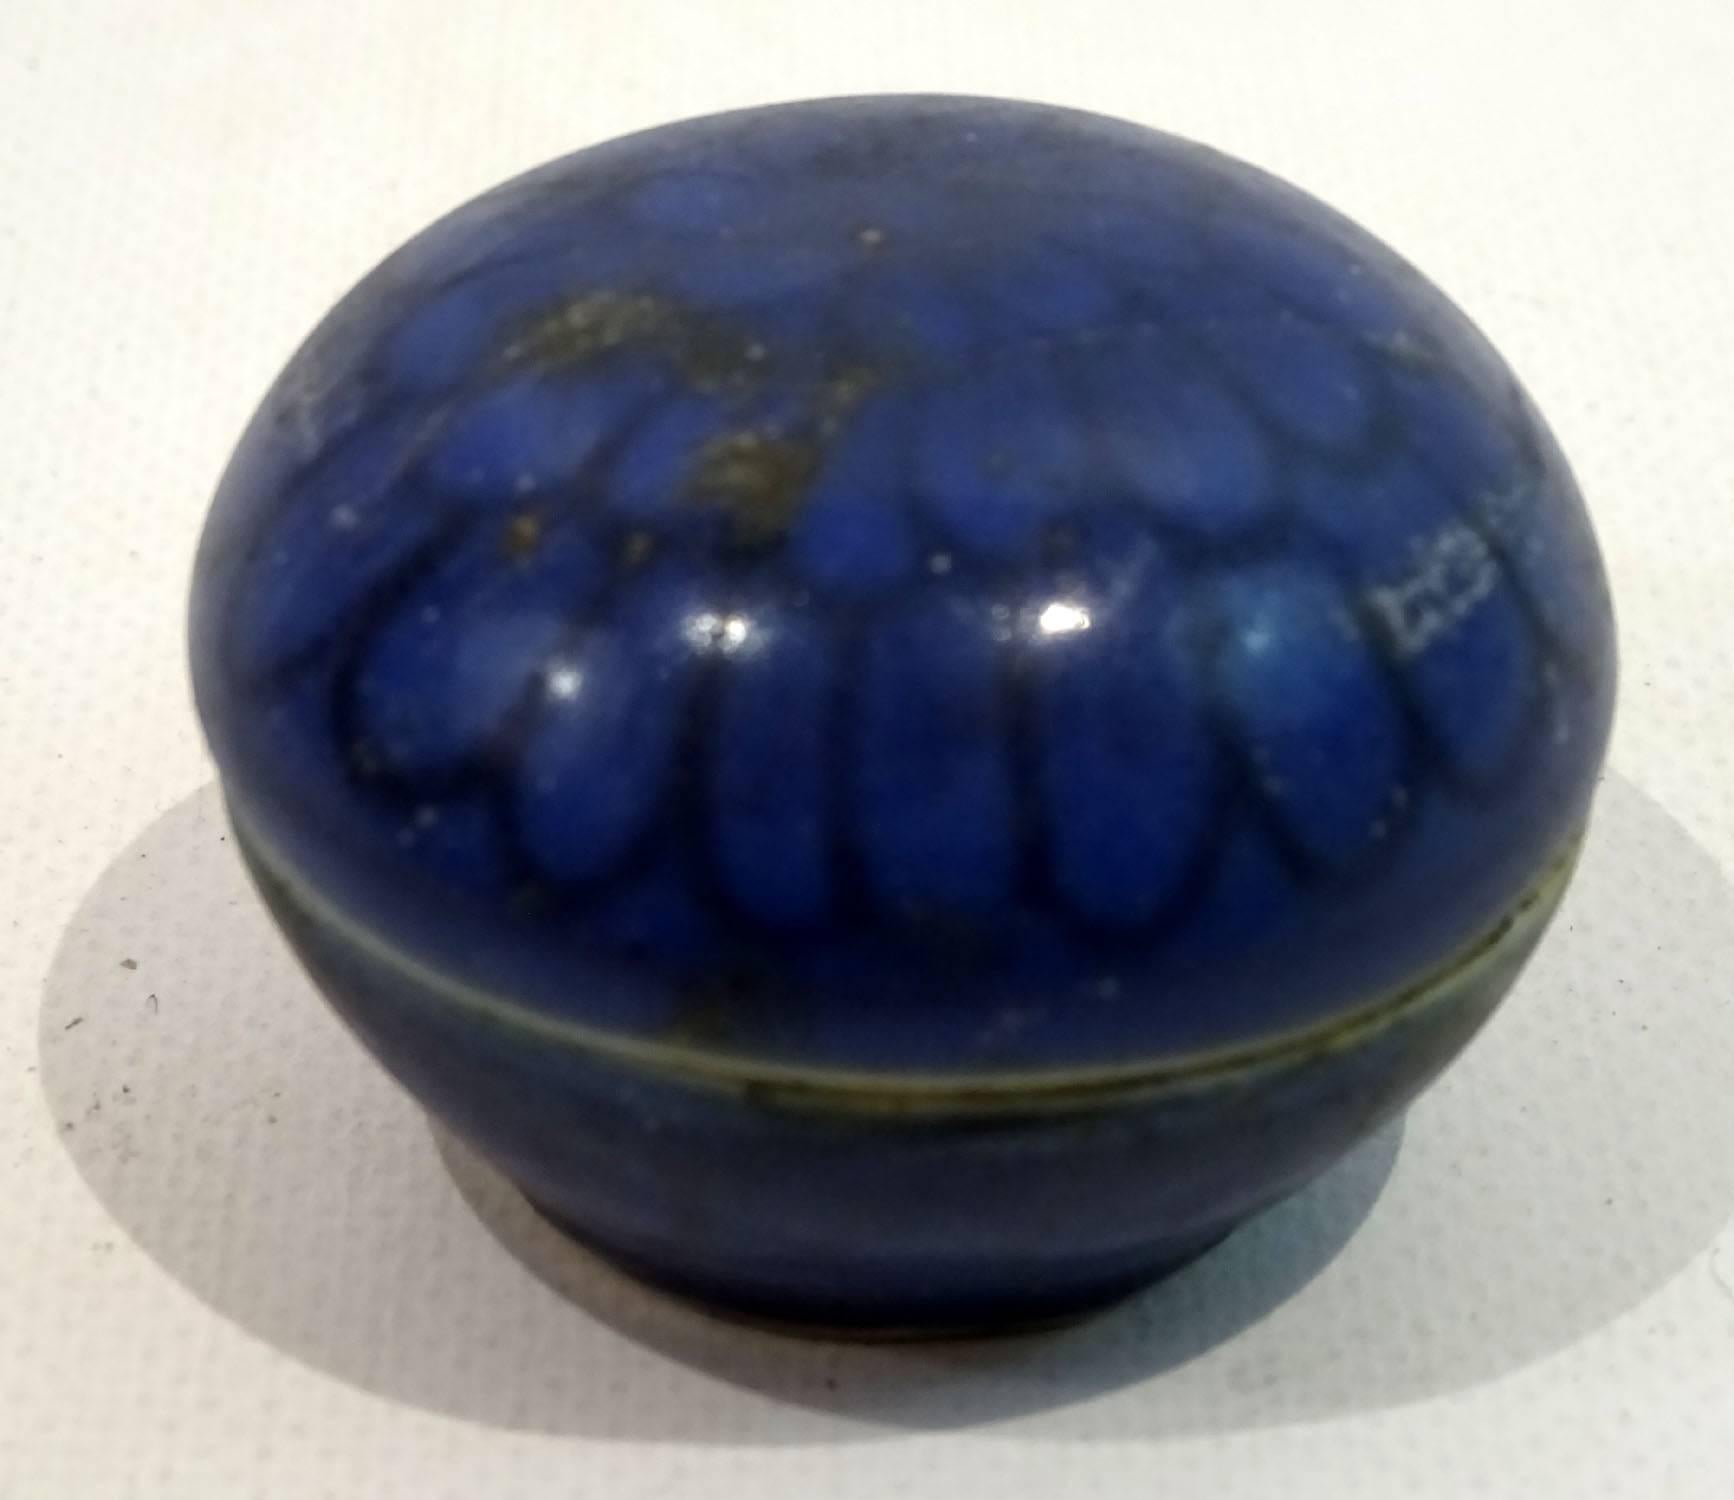 17th Century Chinese Porcelain Cosmetic Jar with Lid from The Hatcher Collection 3